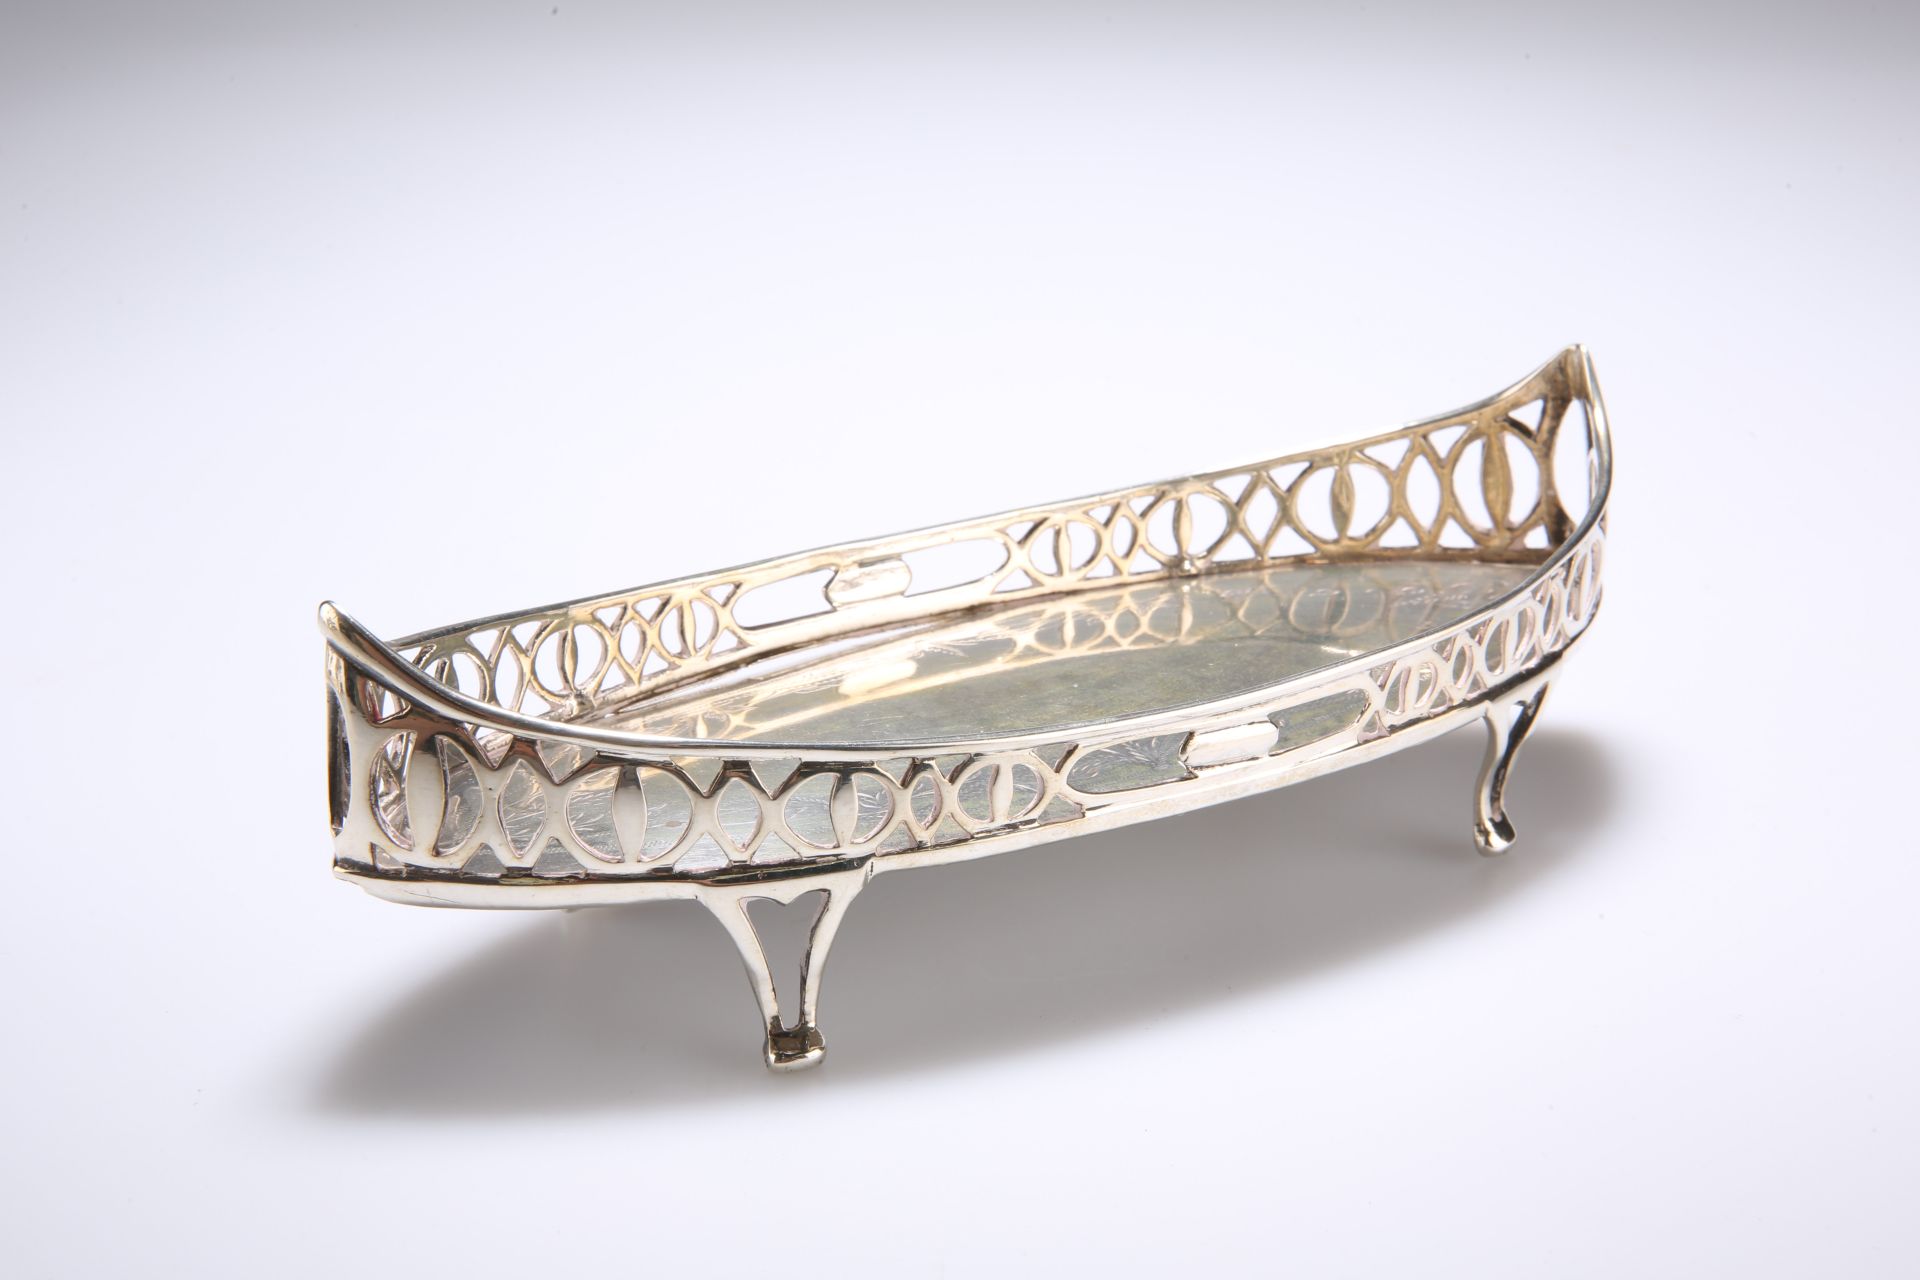 A PORTUGUESE SILVER SNUFFERS TRAY, EARLY 19TH CENTURY